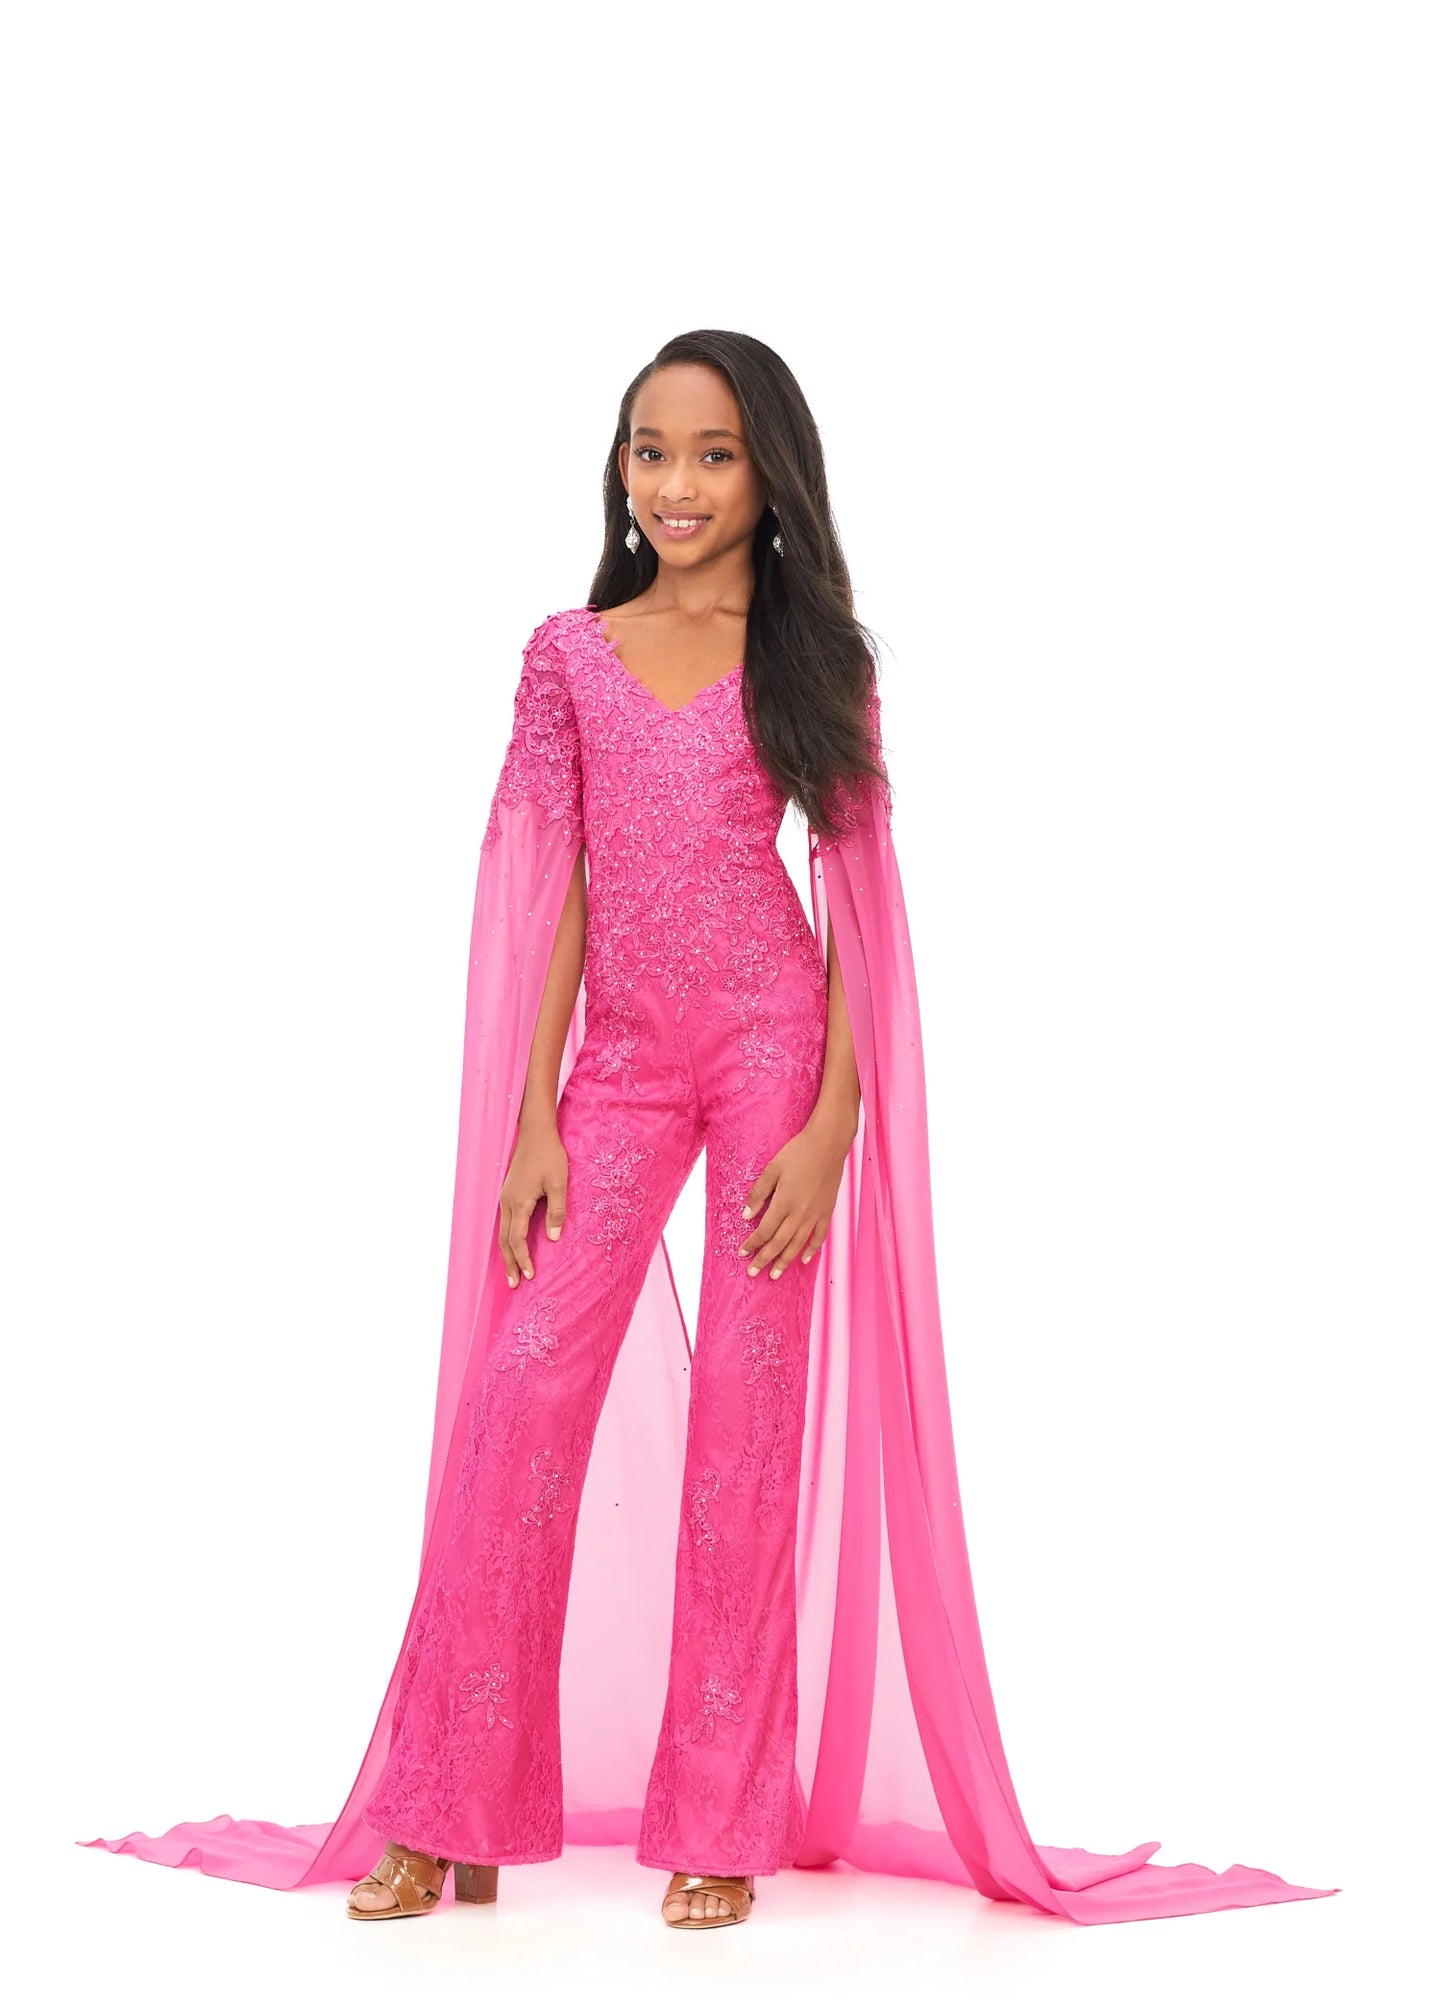 Ashley Lauren Kids 8162 Lace Girls Cape Sleeve Jumpsuit Formal Fun Fashion V Neck Chiffon This jumpsuit is bringing all the drama. It features a v-neckline, lace embroidery and dramatic cape sleeves perfect for your next fun fashion or runway. V-Neckline Embroidery Cape Sleeves Jumpsuit